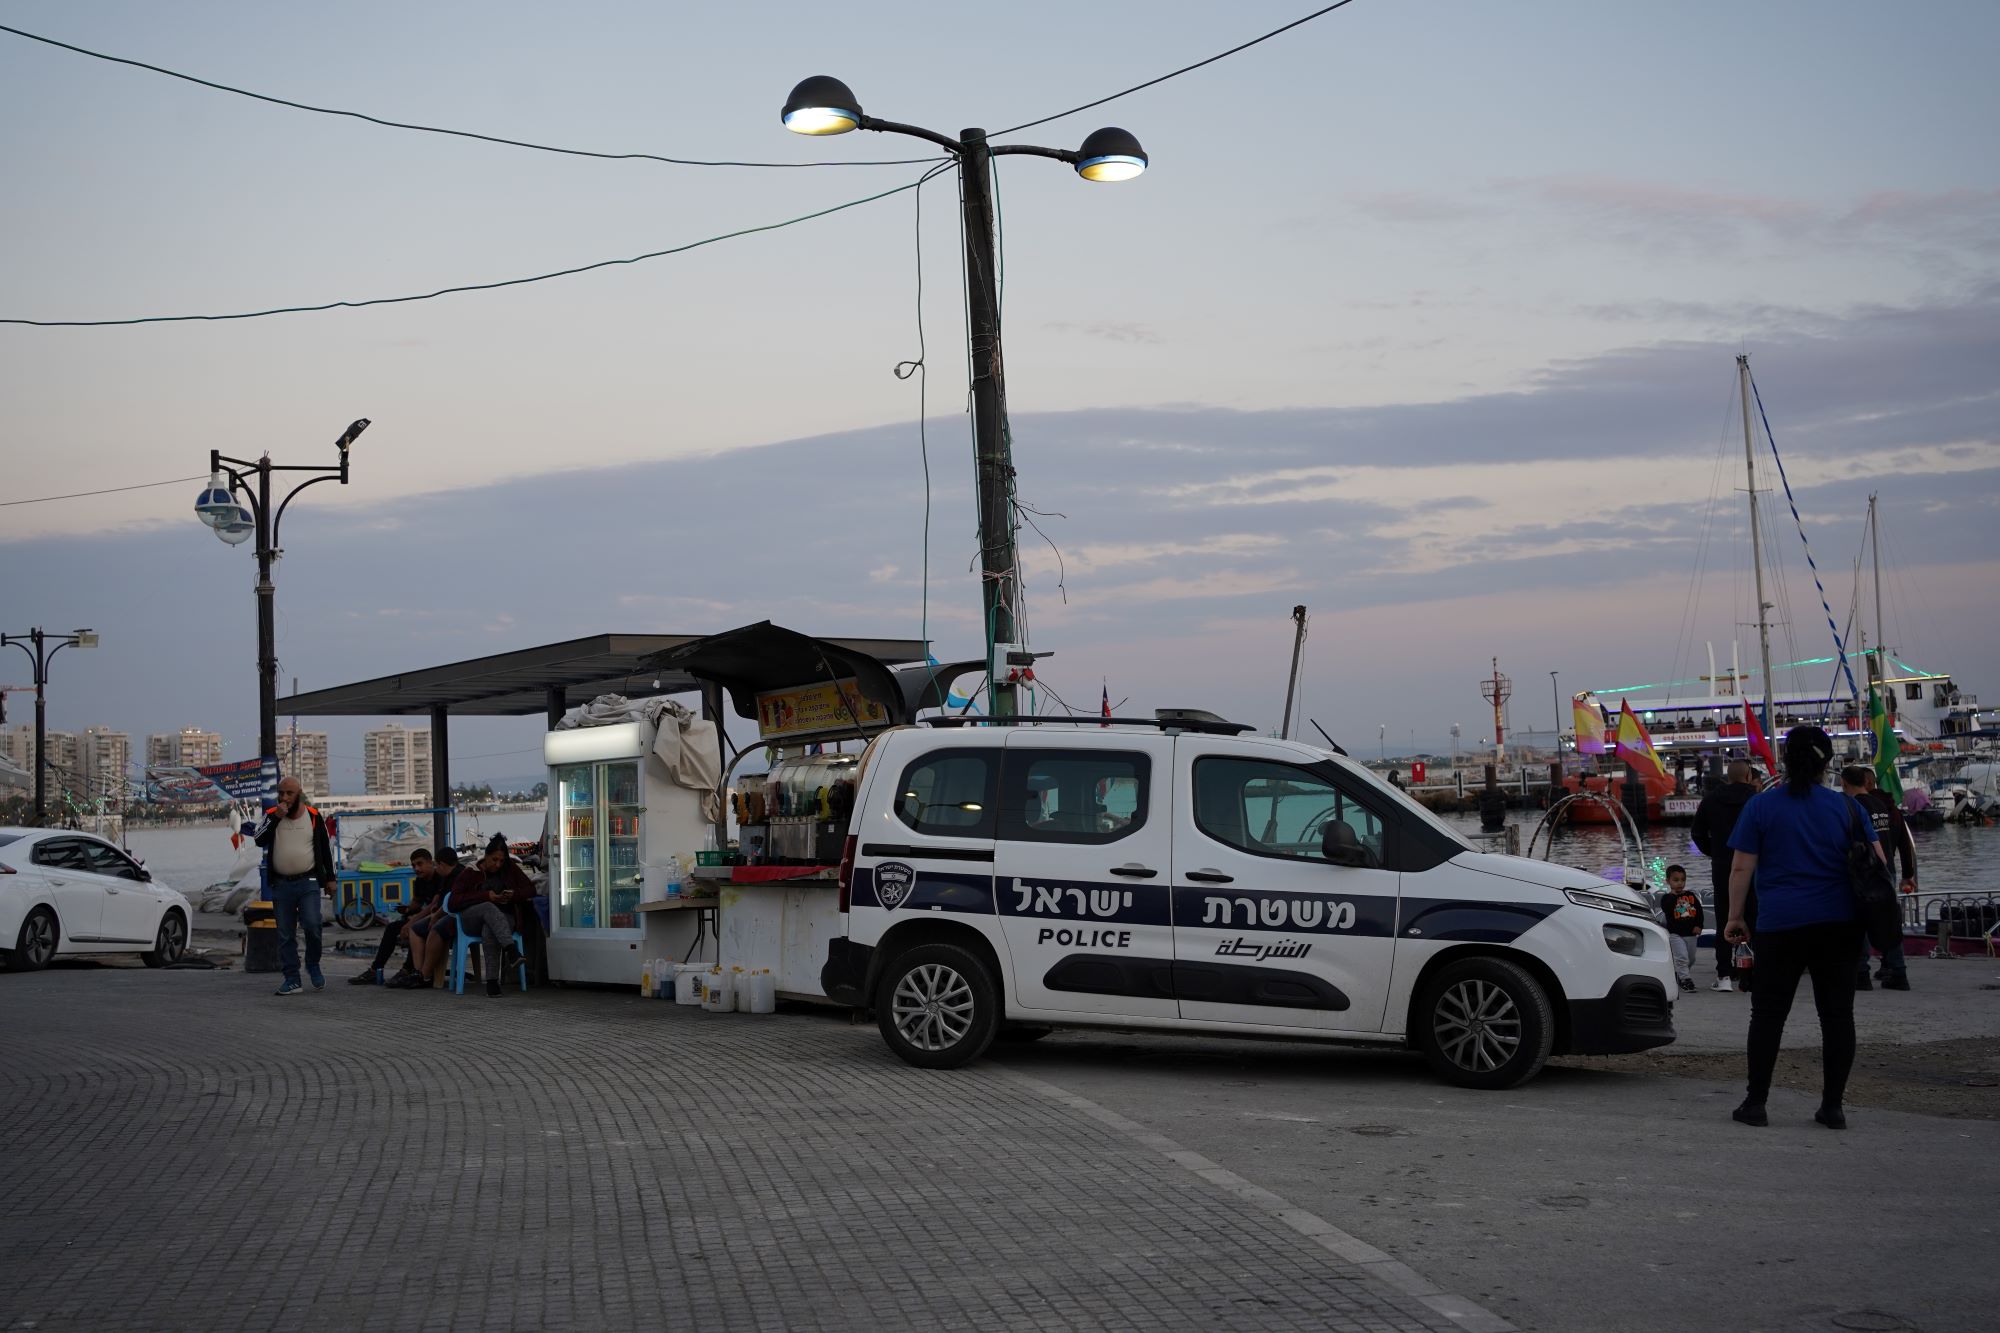 A police car at the port in the Old City of Akka, November 2022. (Maria Zreik)